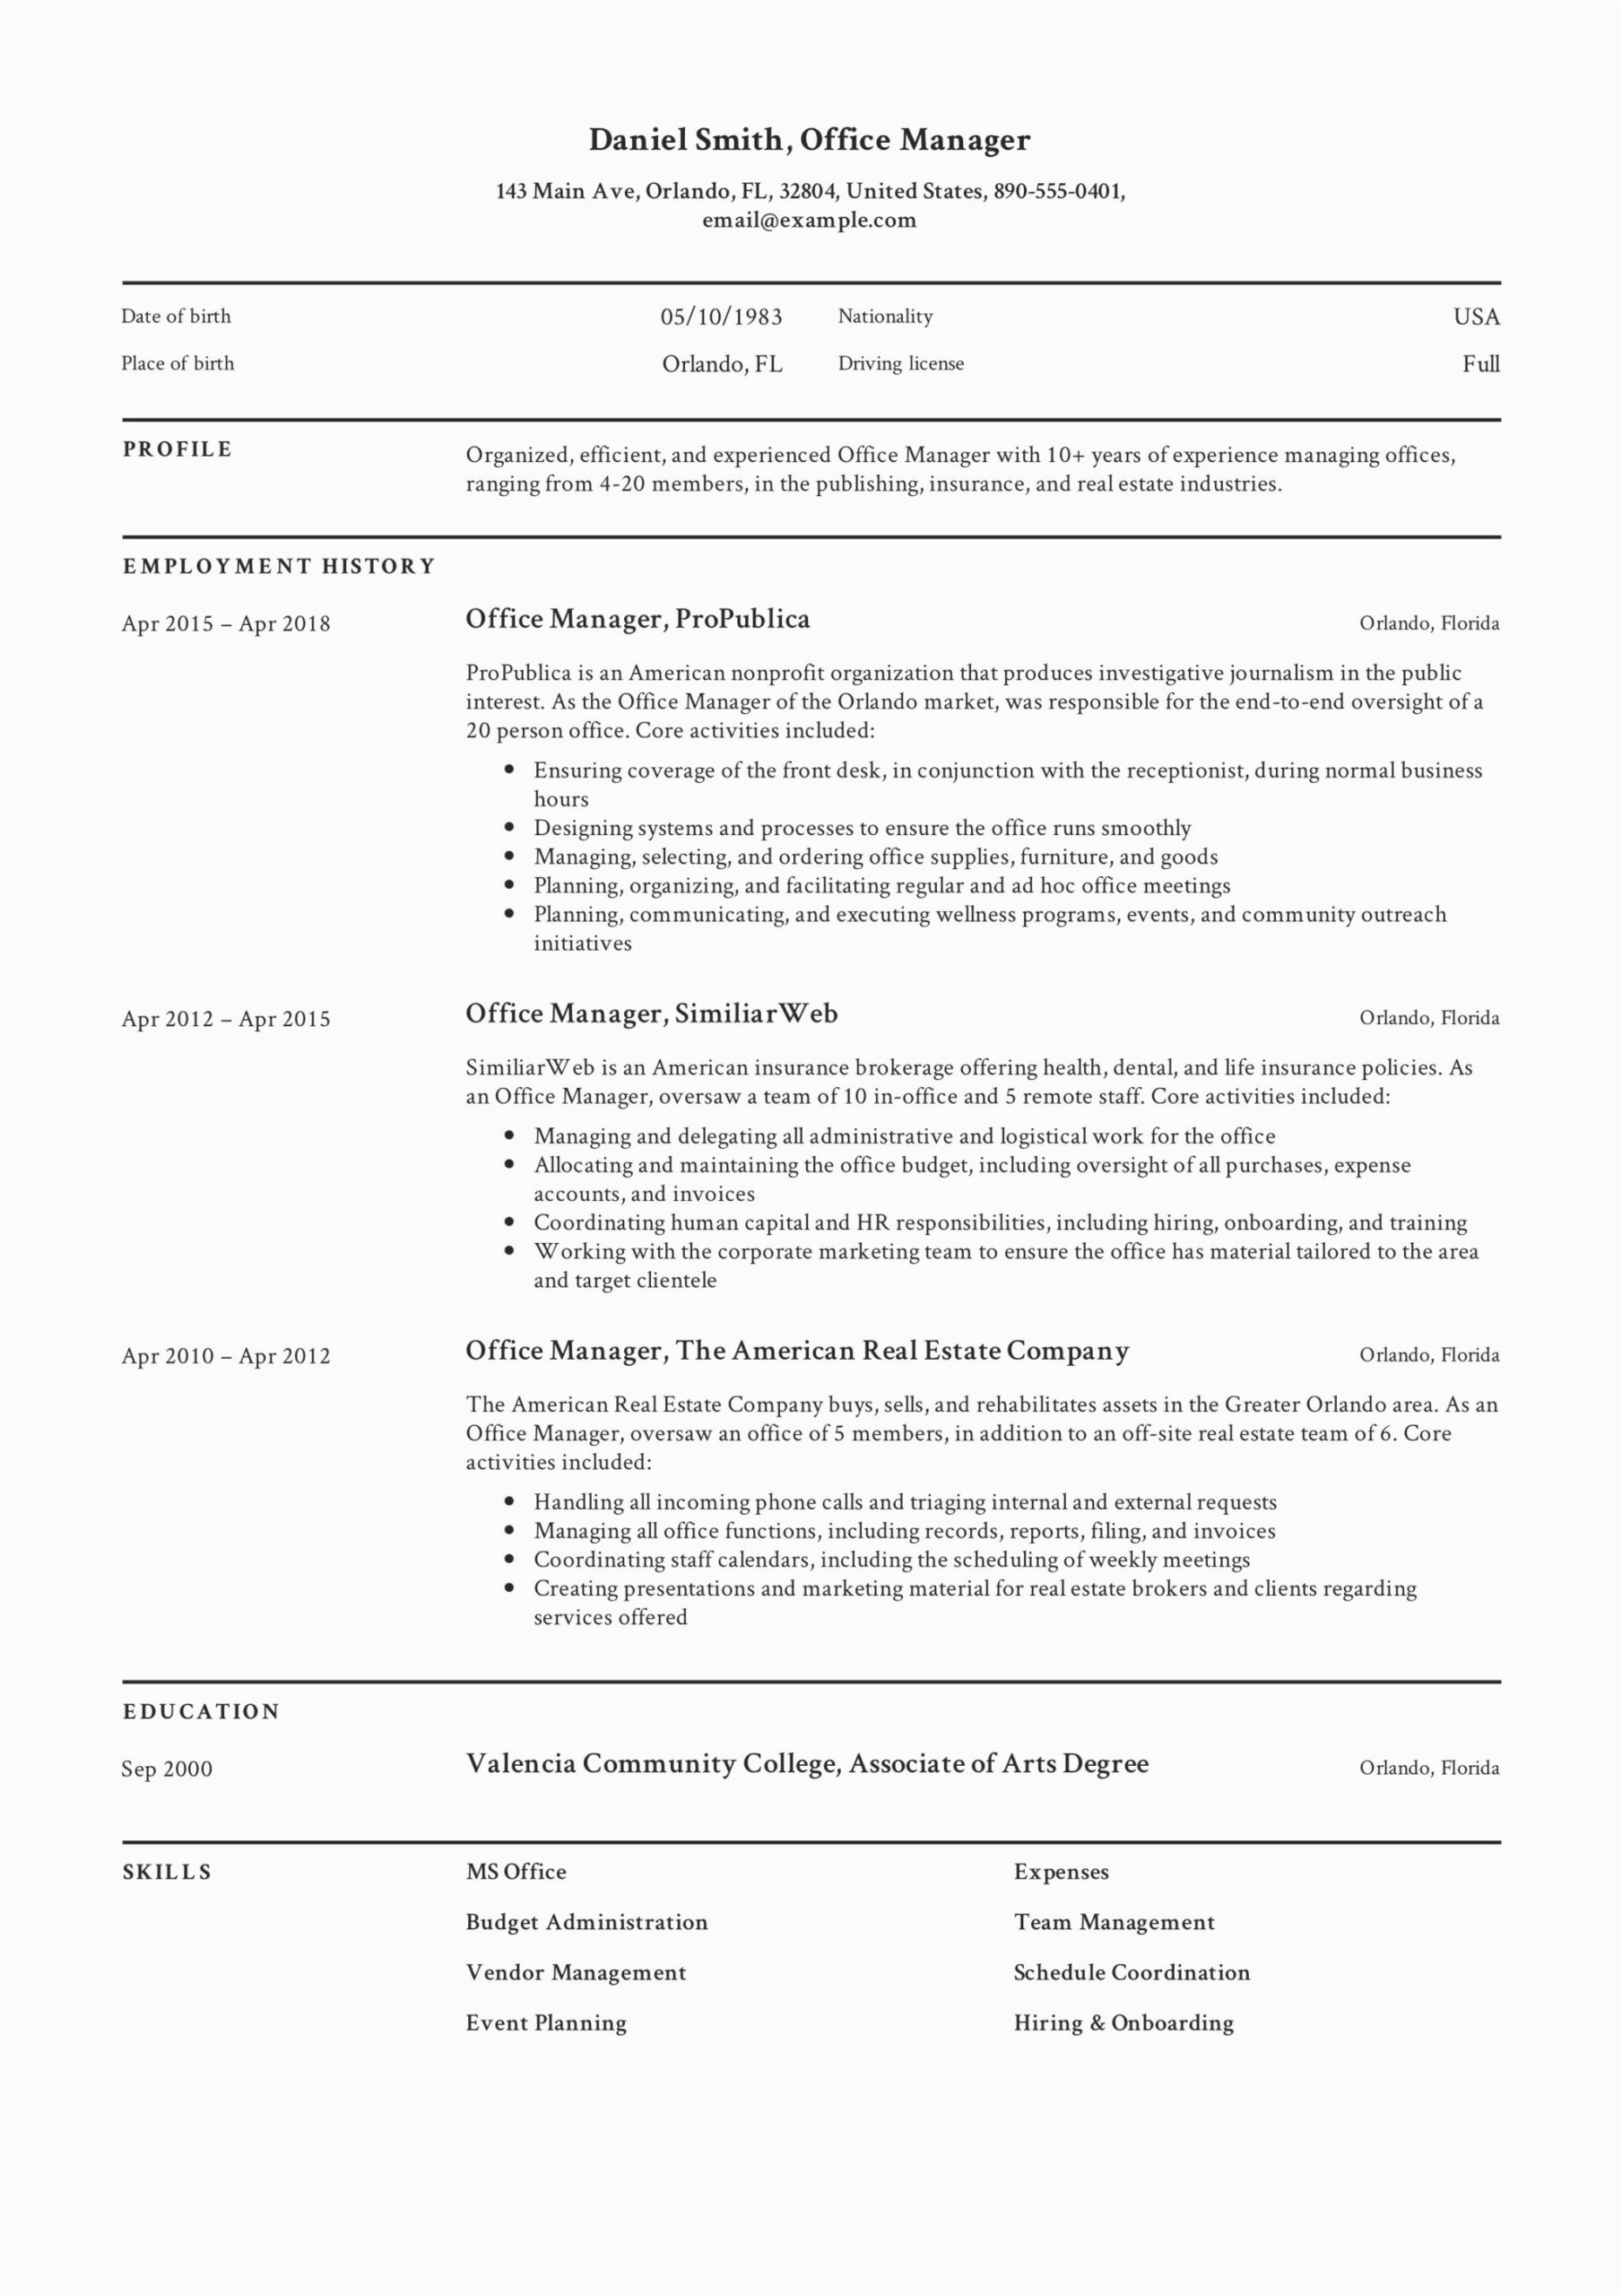 Free Resume Samples for Office Manager Guide Fice Manager Resume [ 12 Samples ] Pdf